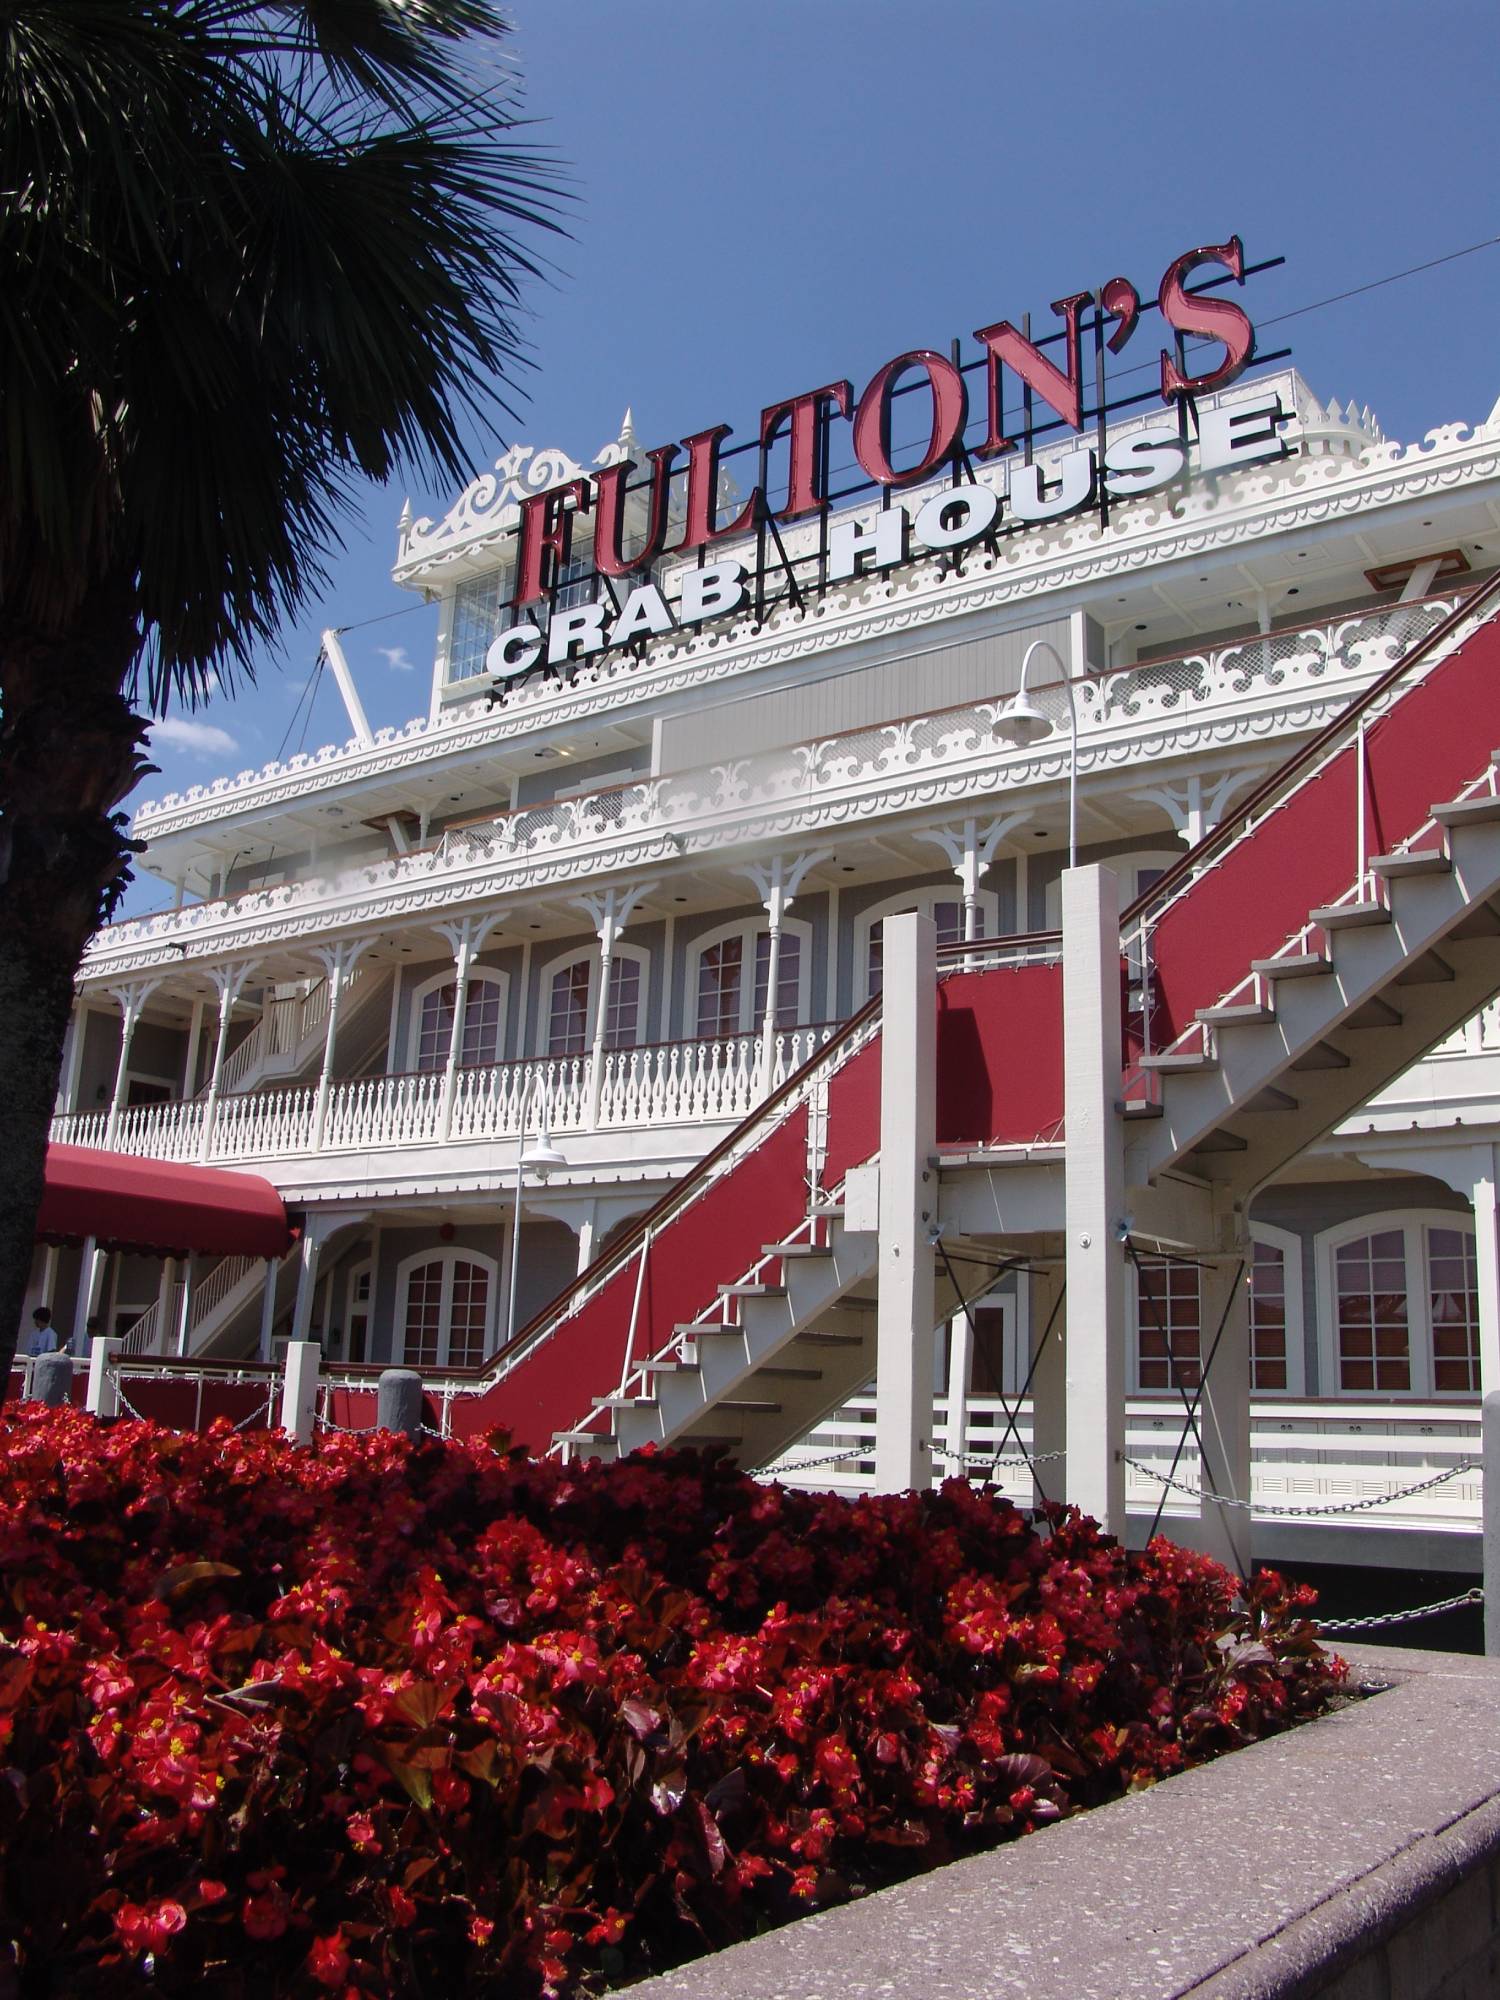 Enjoy a seafood feast at Fulton's Crab House in Downtown Disney | PassPorter.com